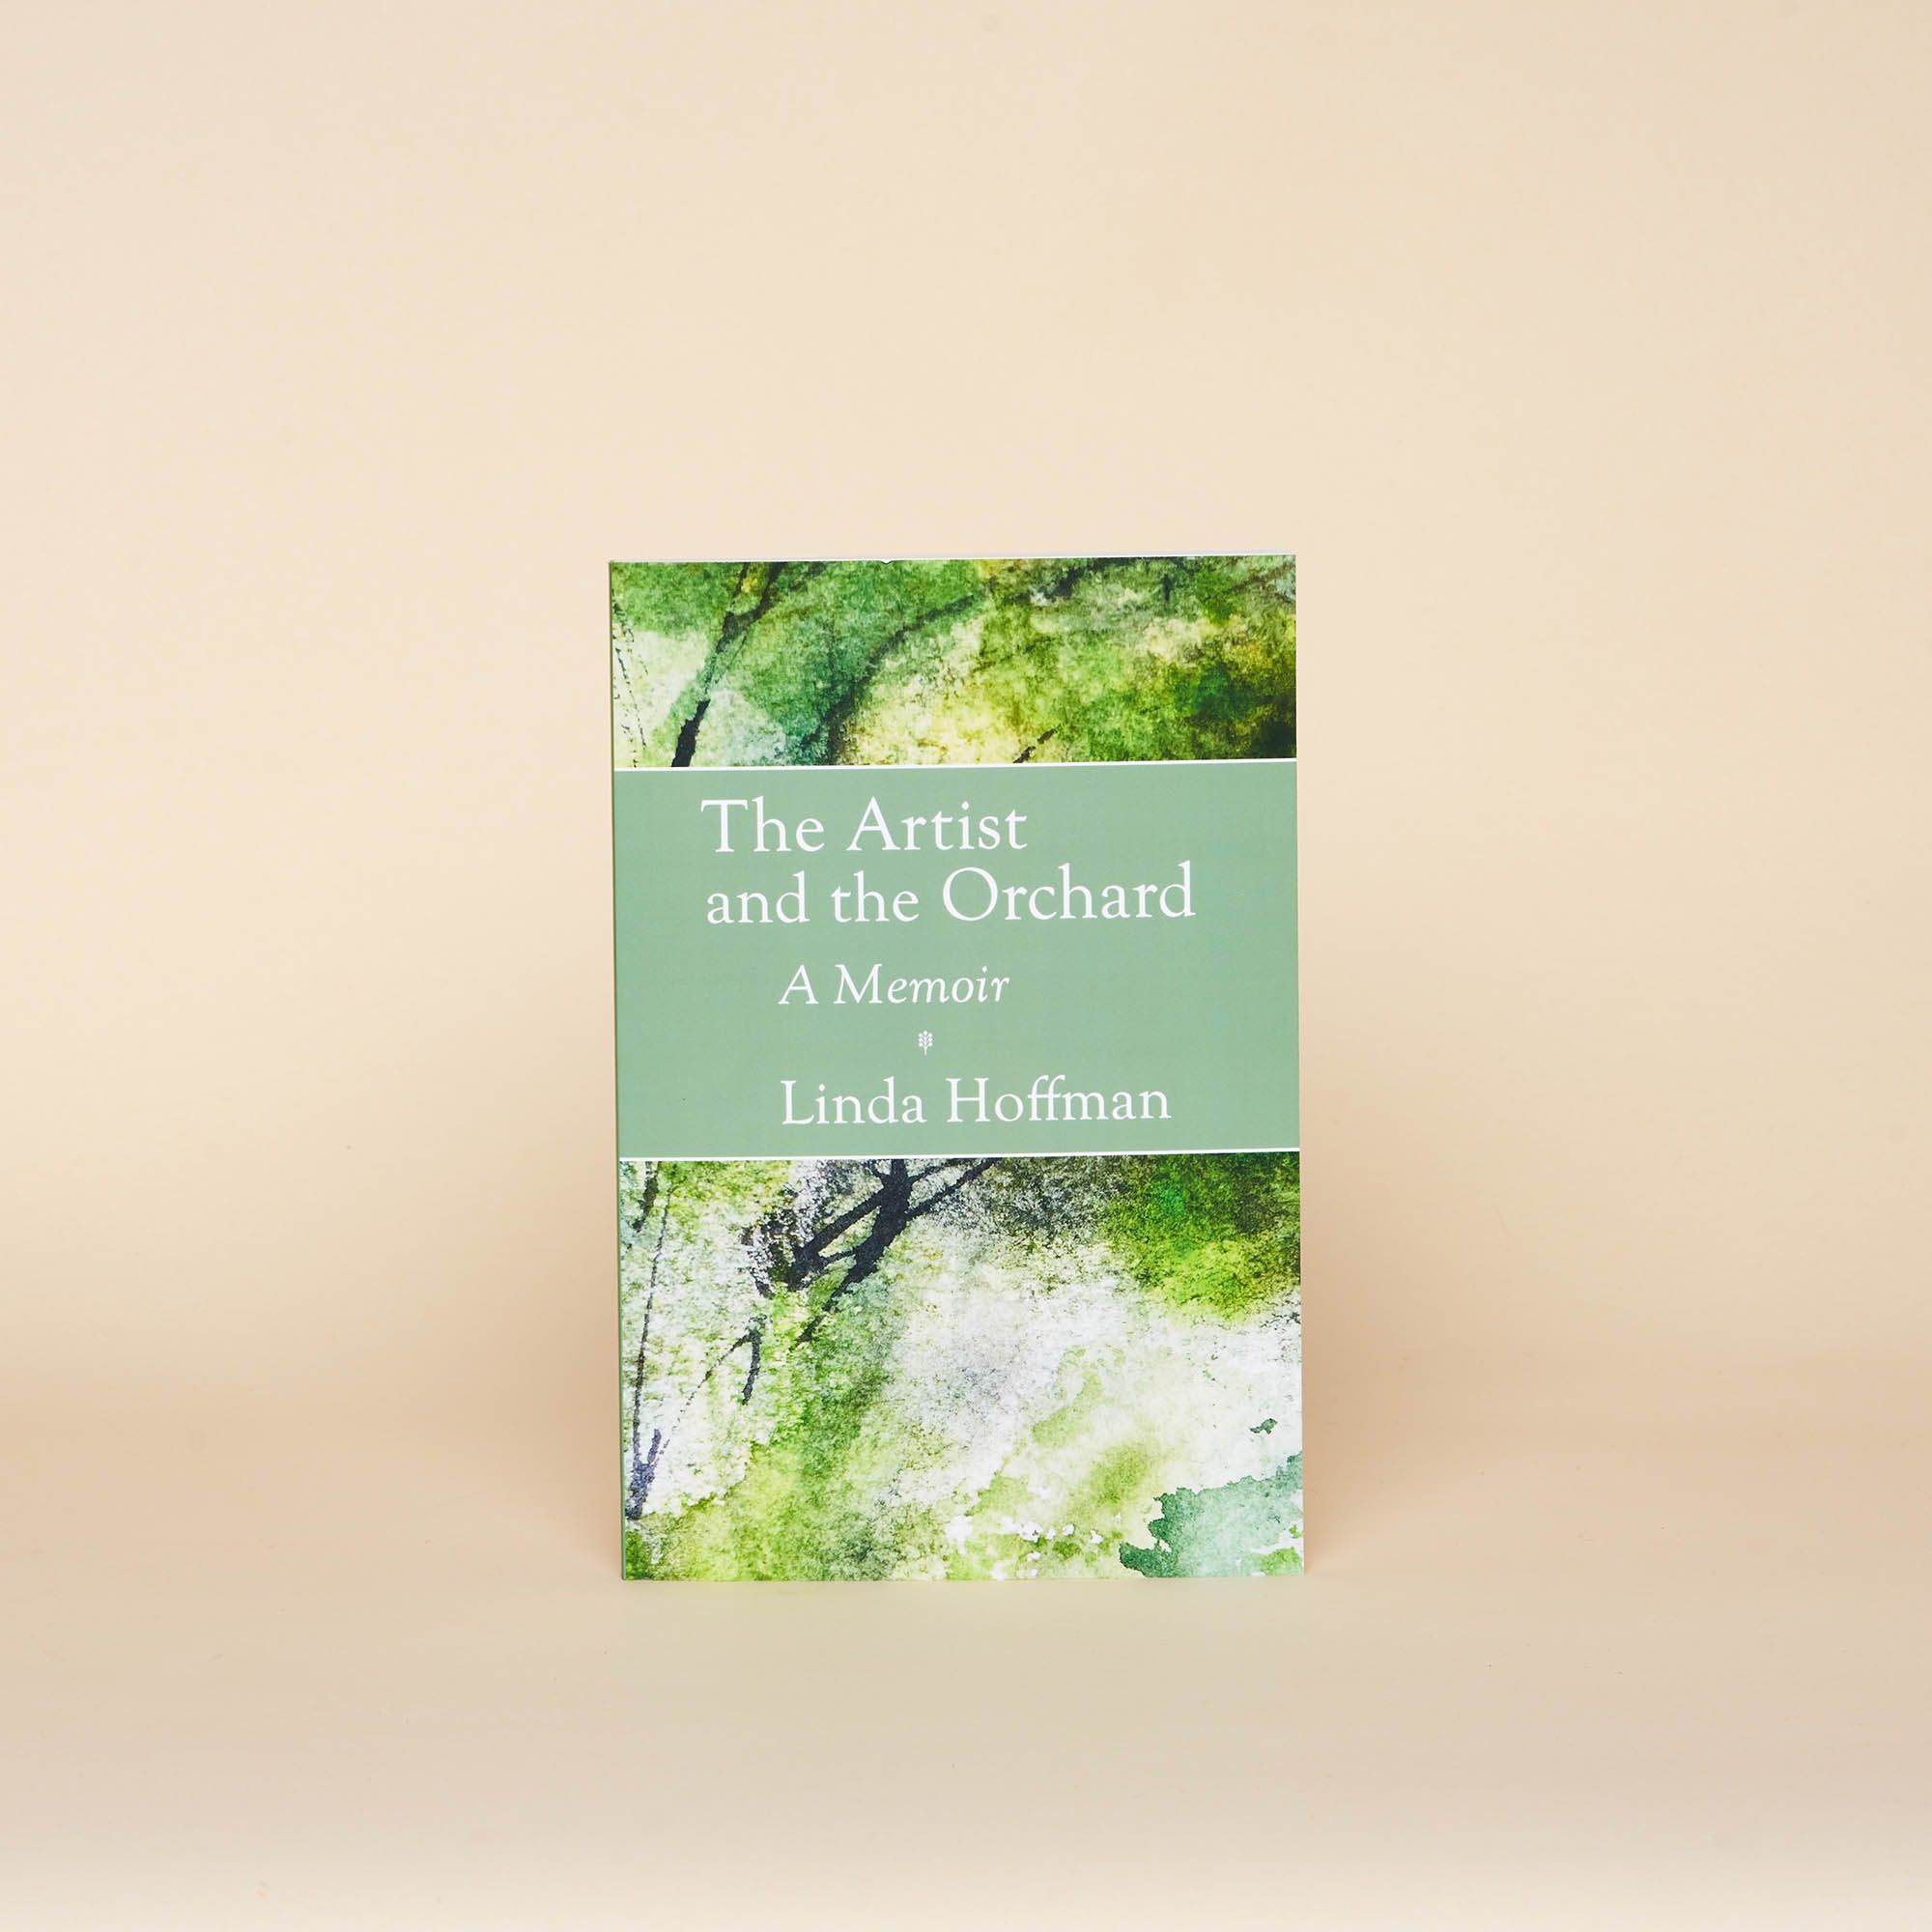 The Artist and the Orchard: A Memoir by Linda Hoffman. Features an impressionist painting of trees.